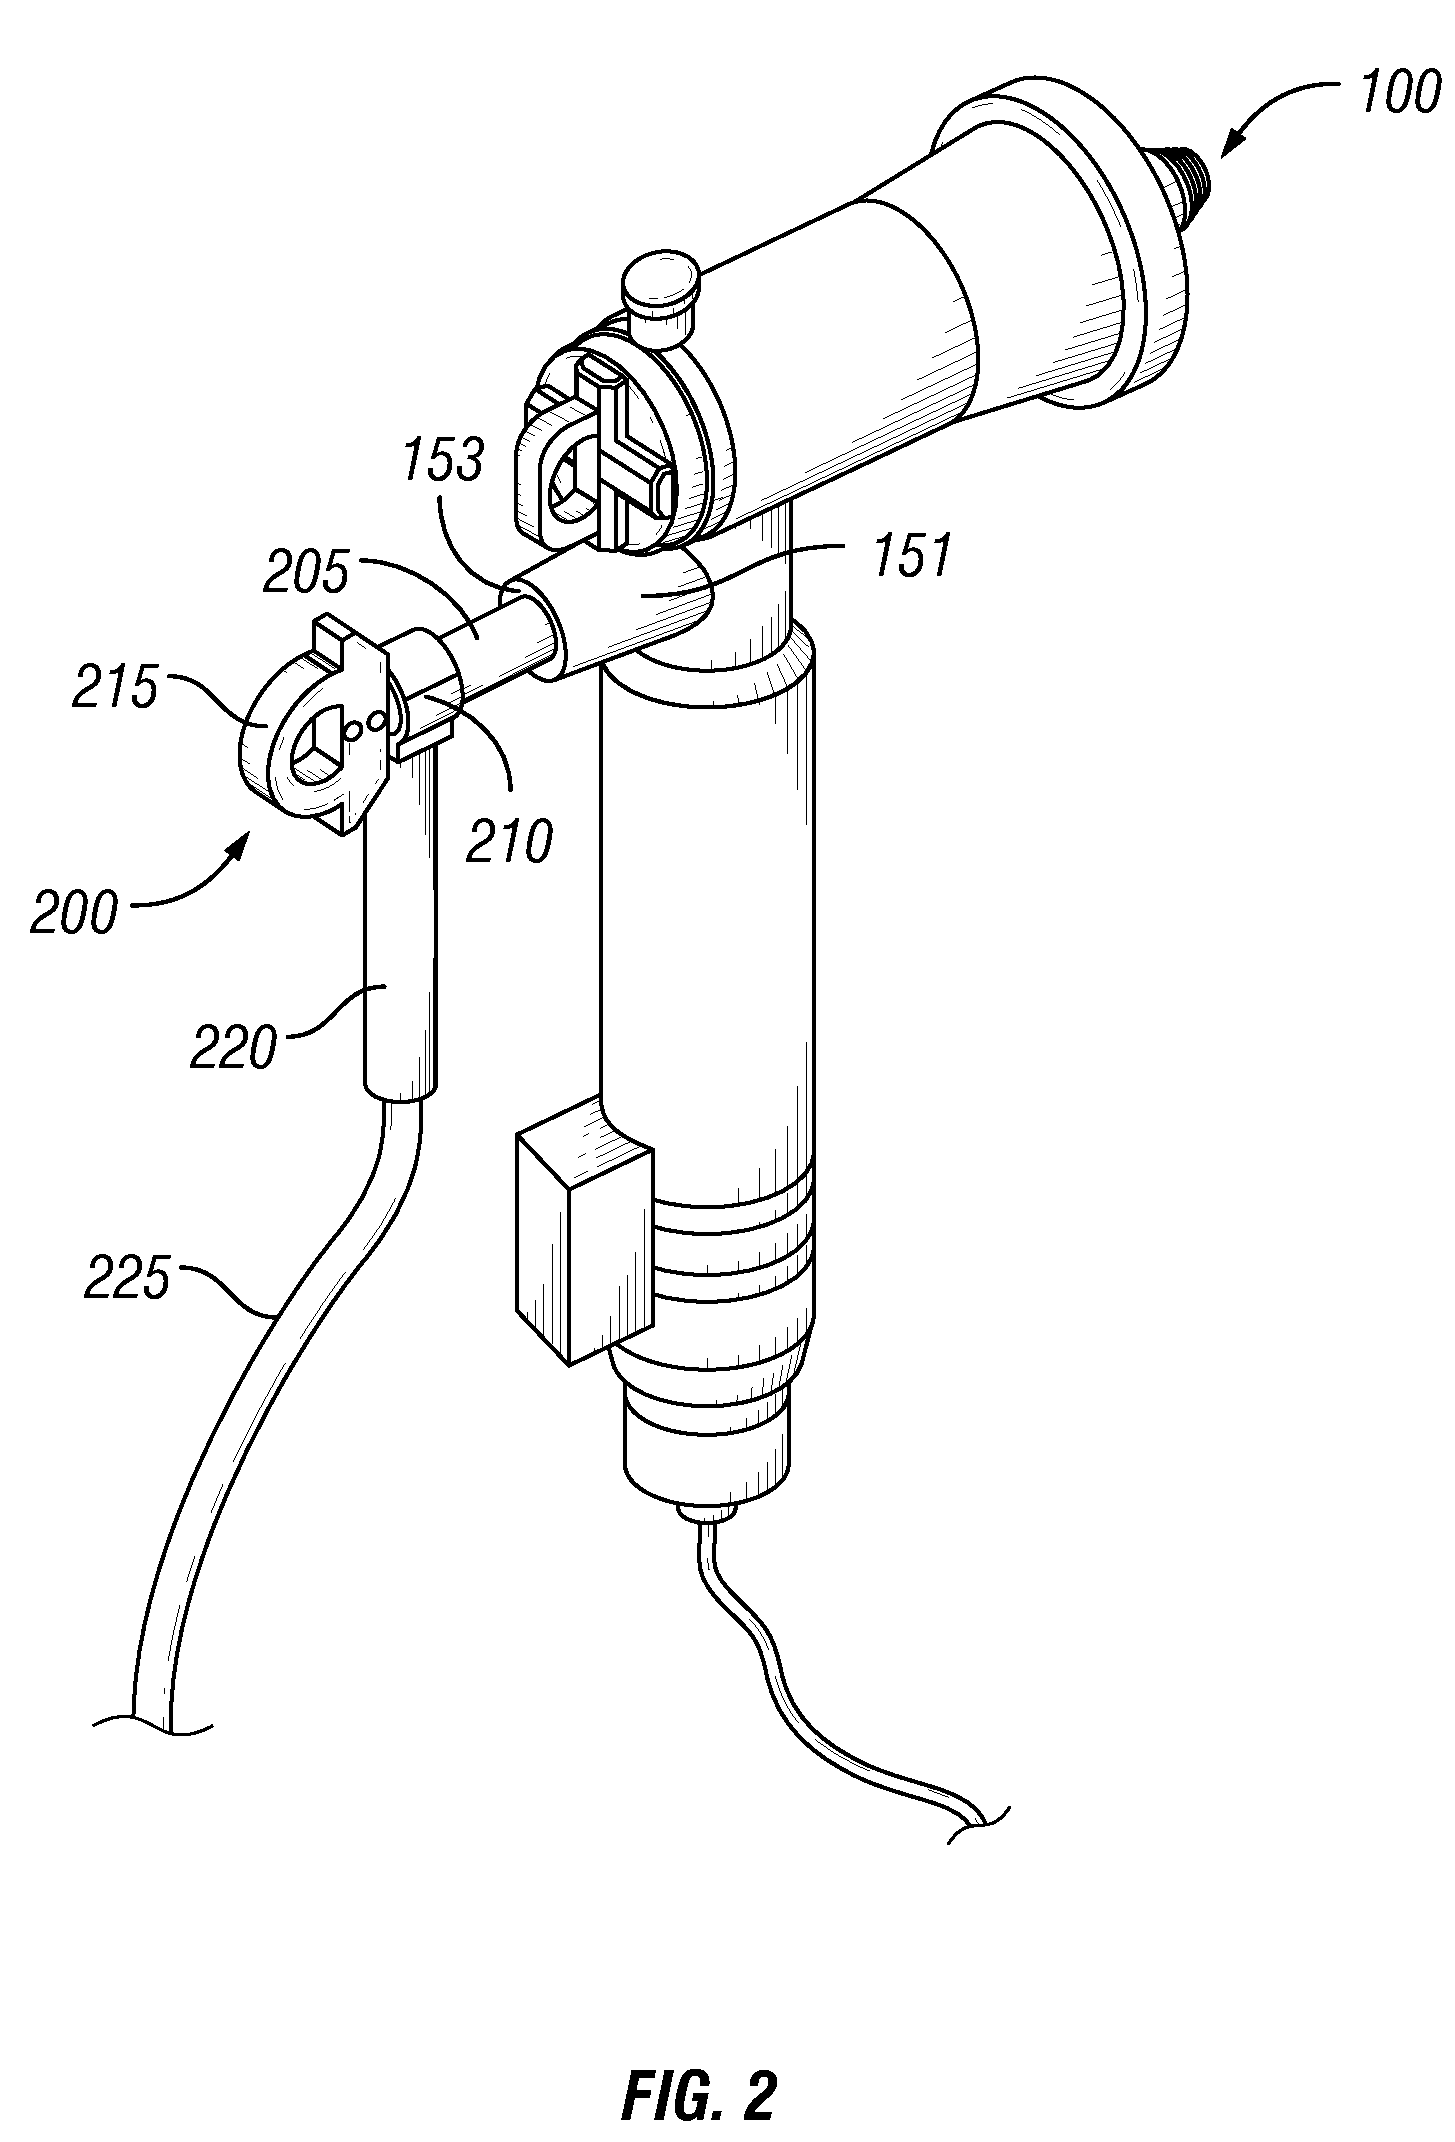 Fully insulated fuse test and ground device